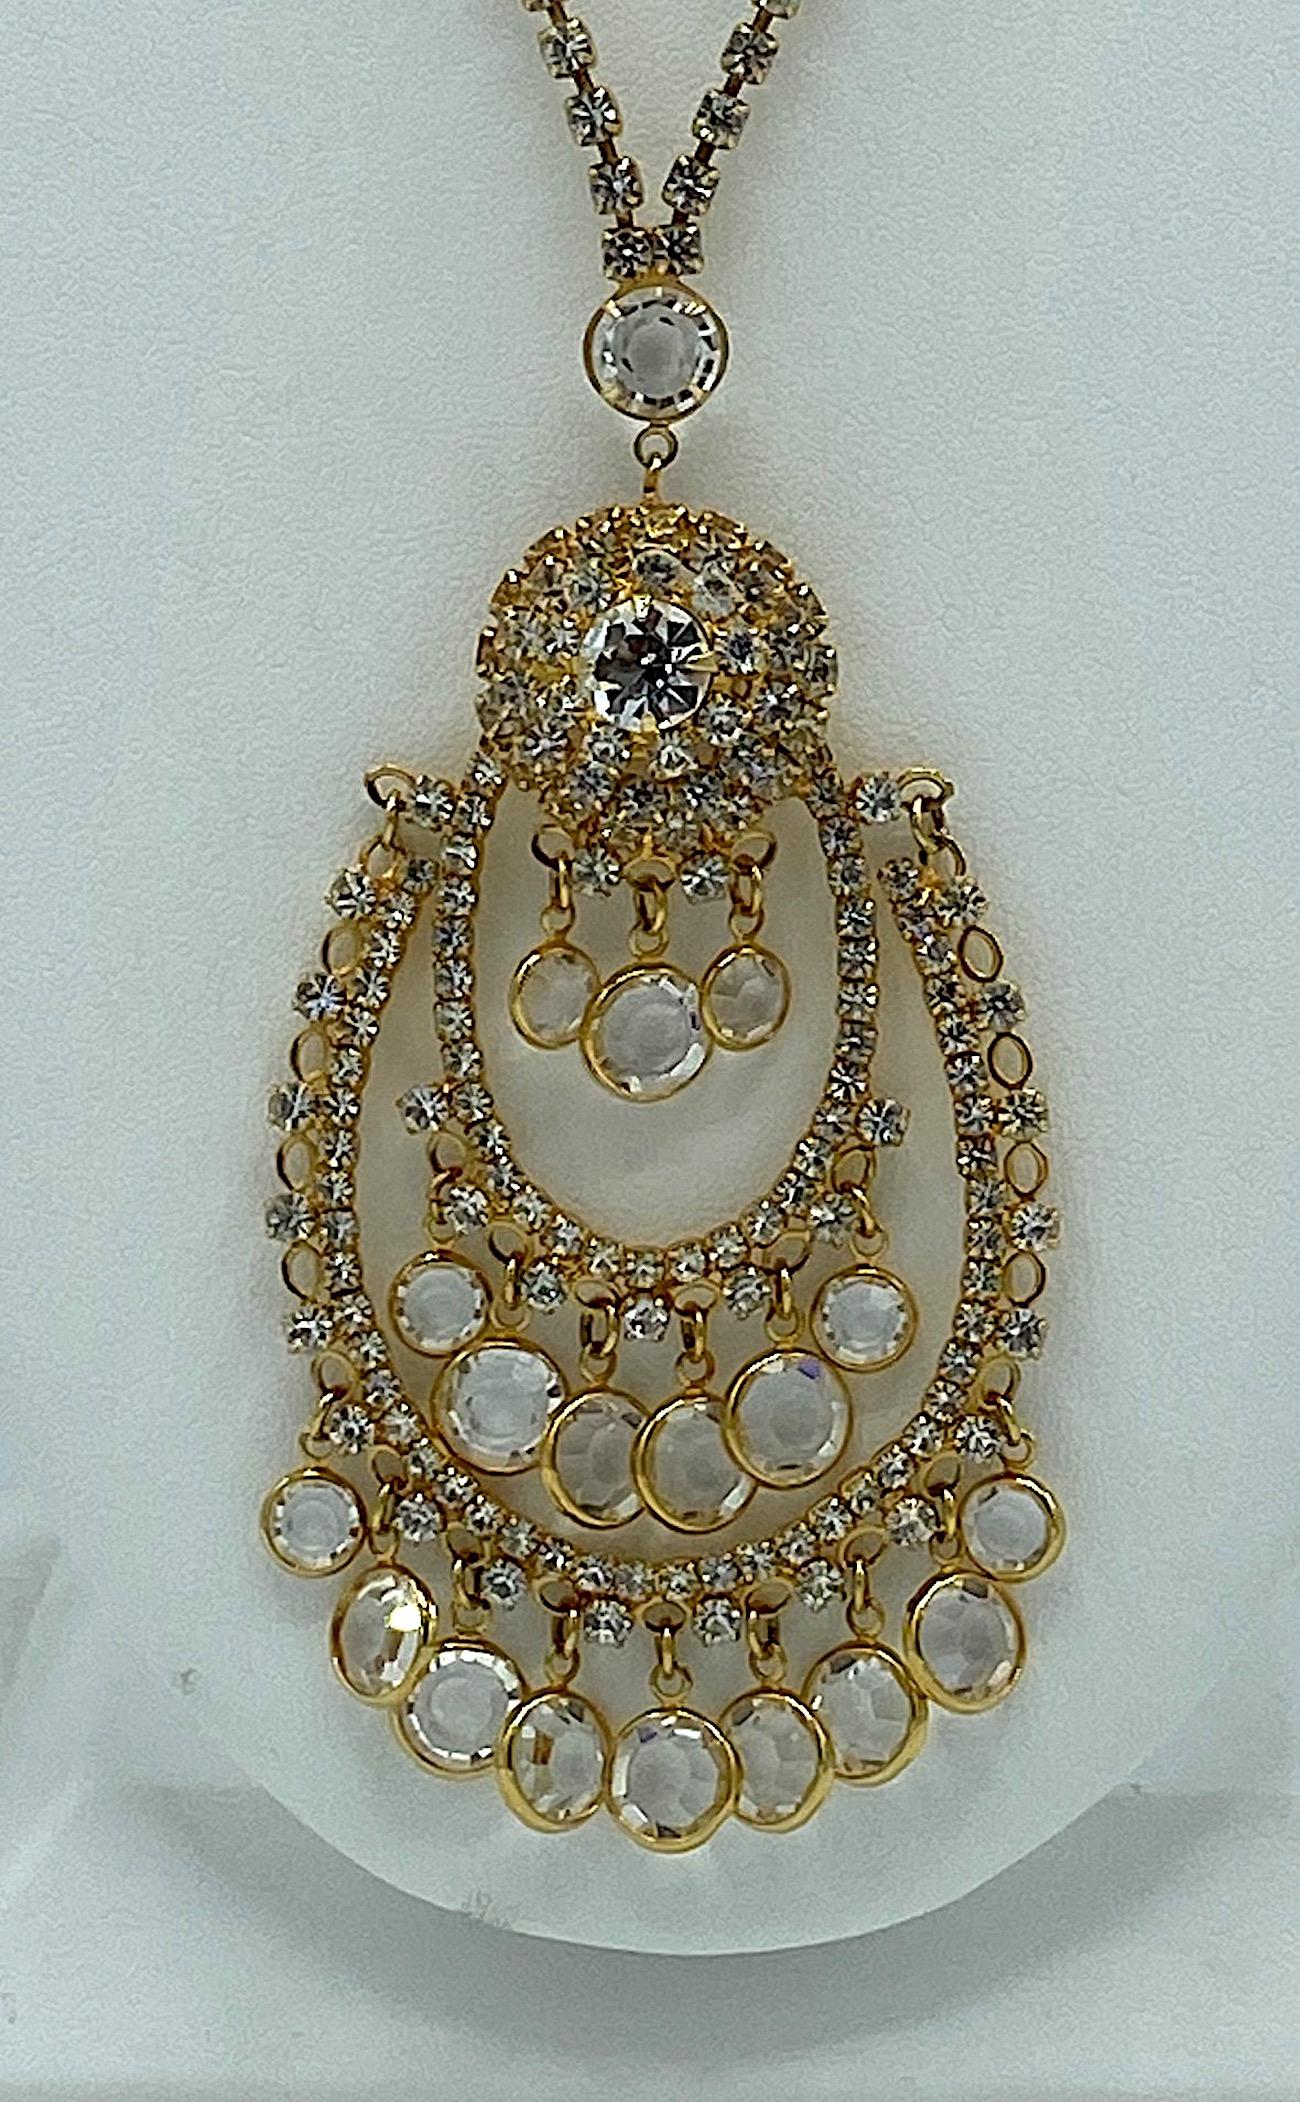 Briolette Cut 1960s Gold with Rhinstones & Crystals Pendent Necklace and Earring Set